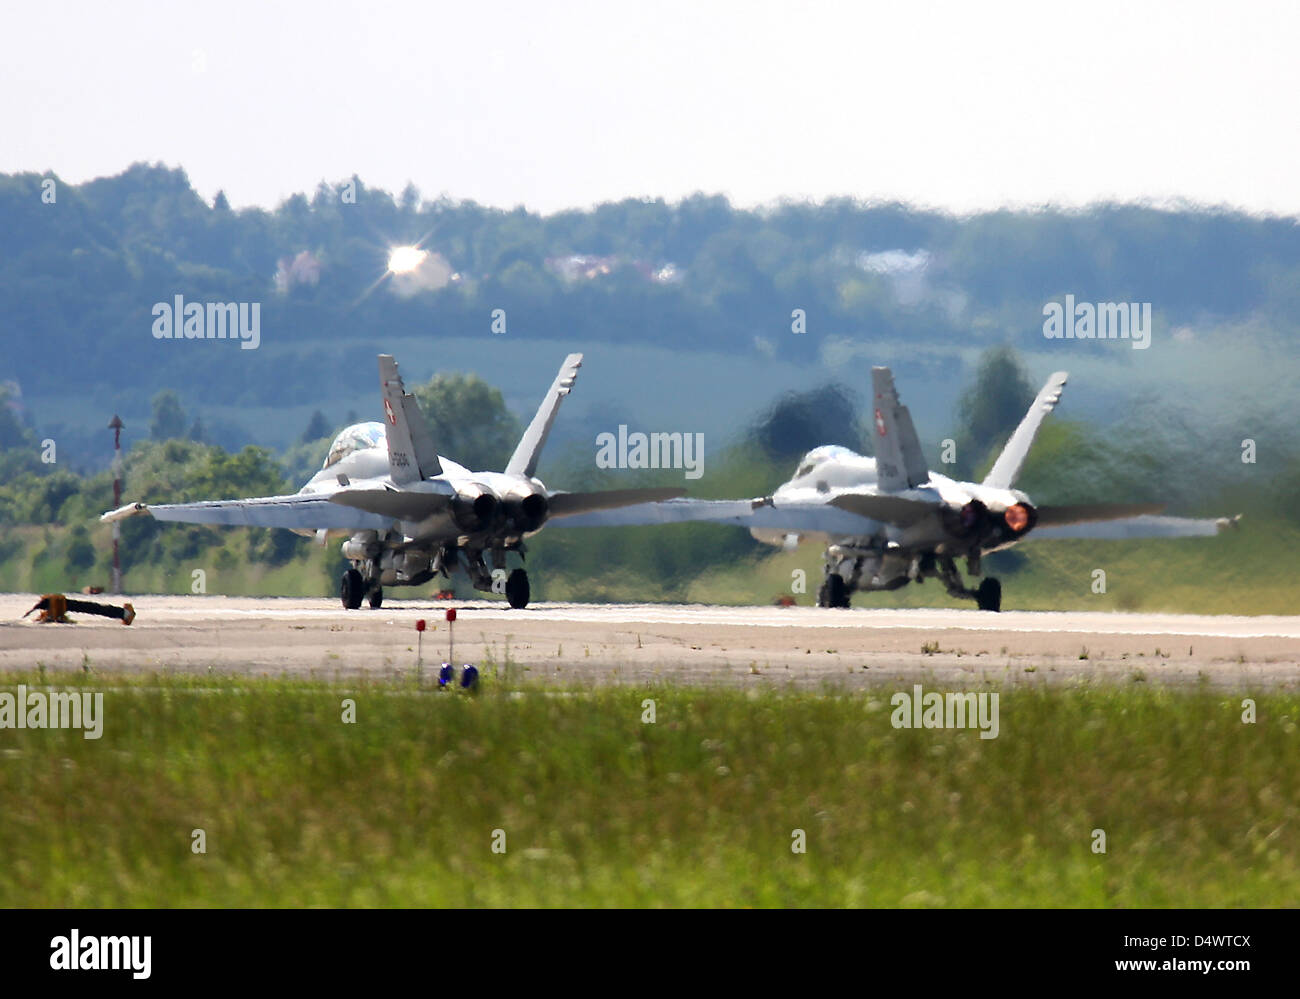 Two F-18C Hornets of the Swiss Air Force armed with AIM-120 AMRAAM missiles during exercise ELITE, Neuburg Airfield, Germany. Stock Photo